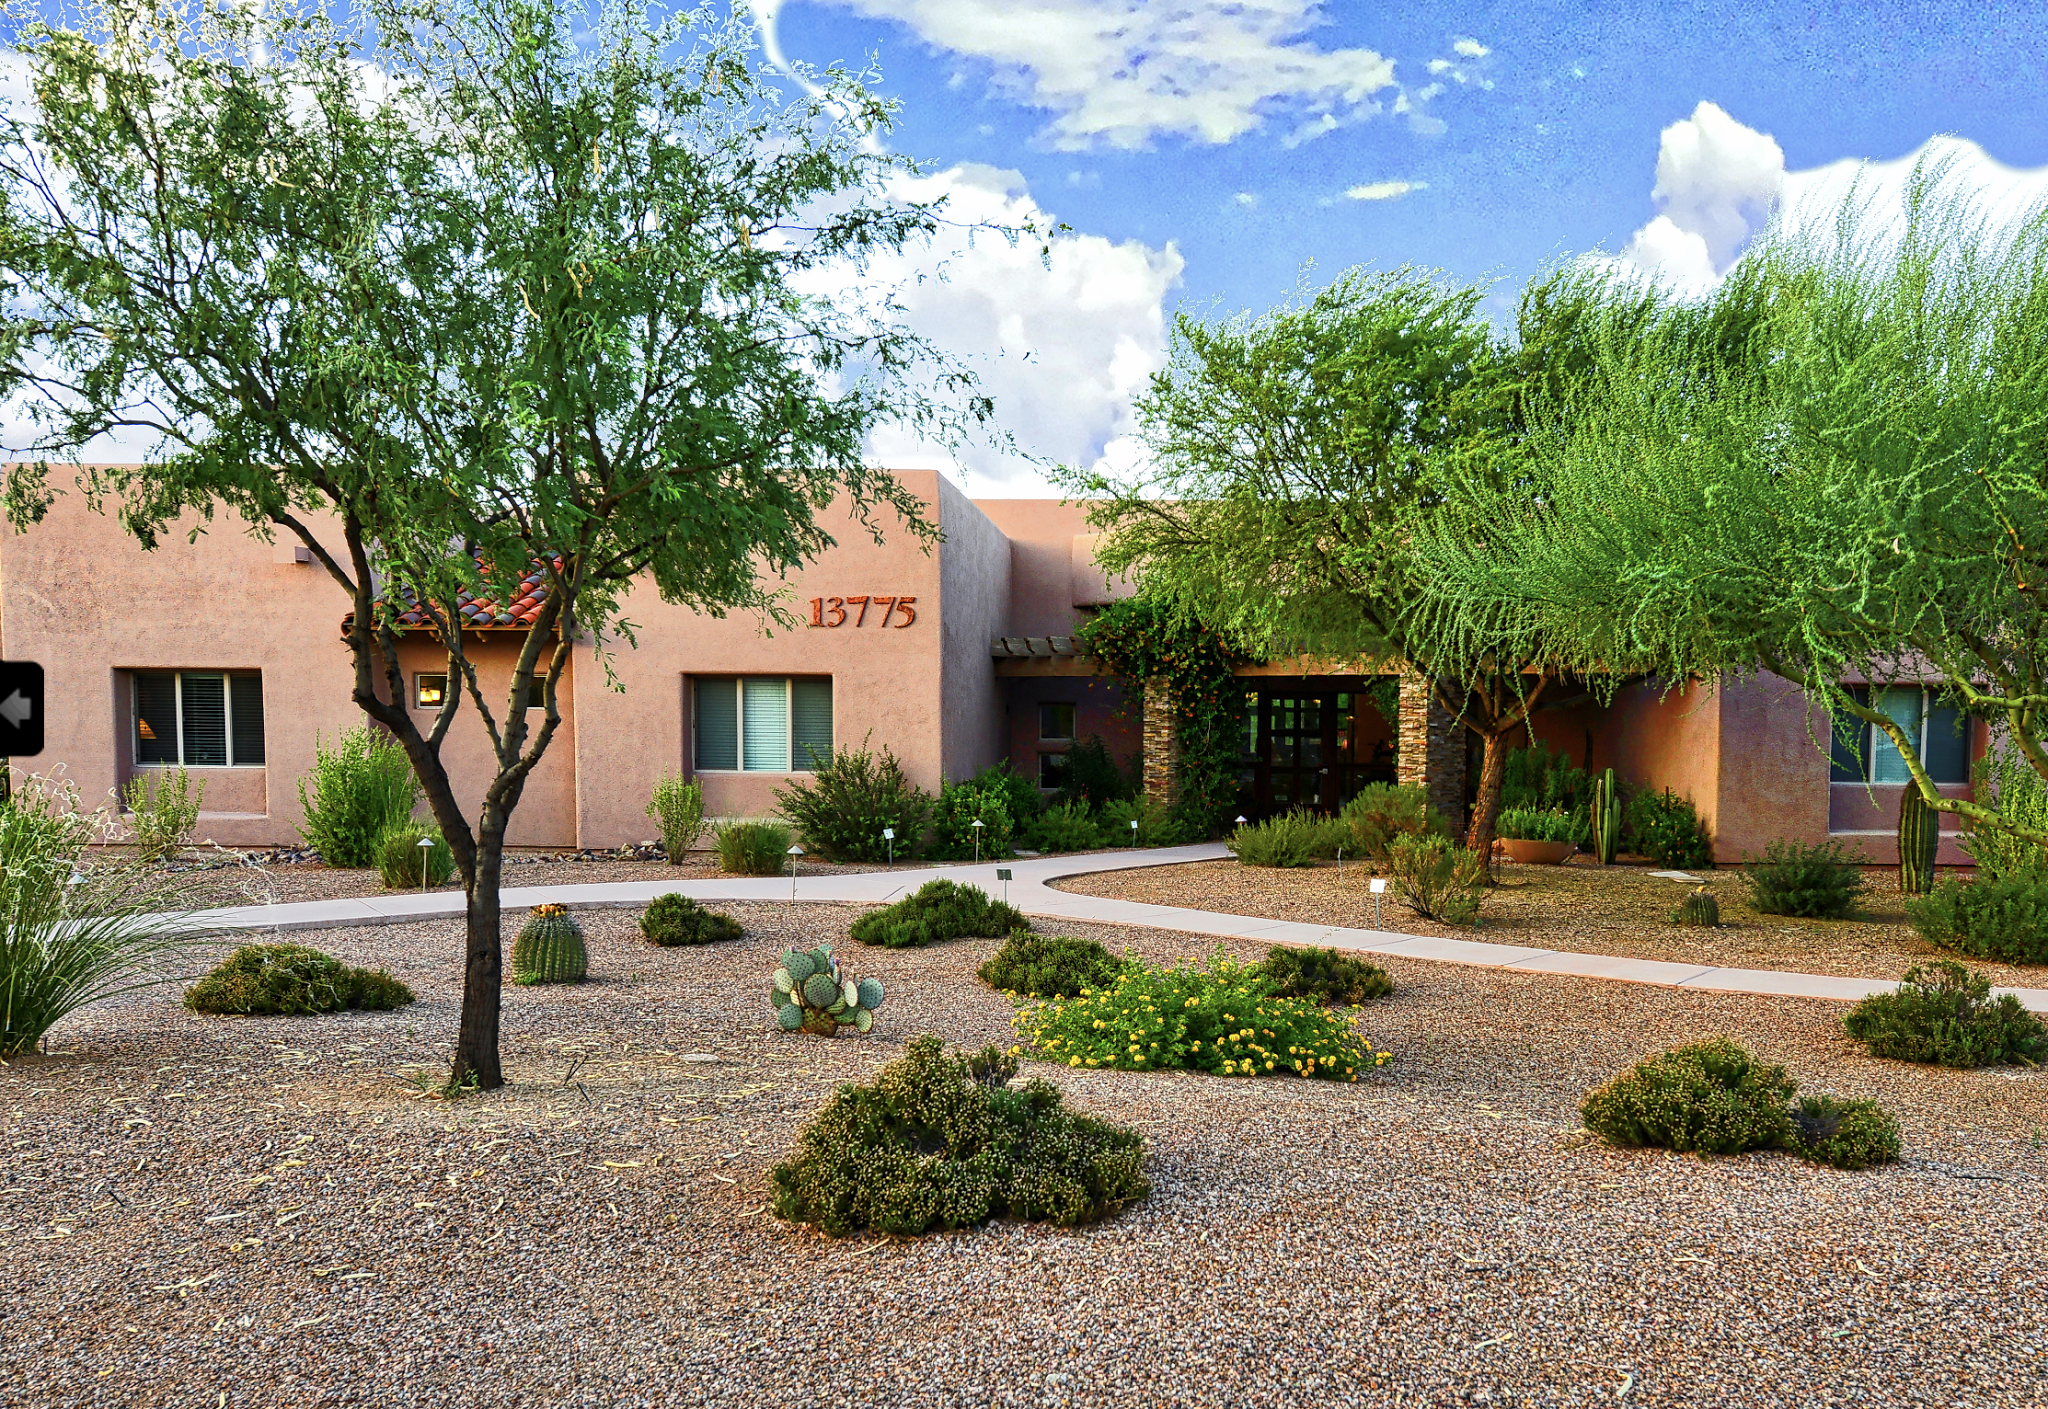 The Best Assisted Living Facilities in Tucson, AZ